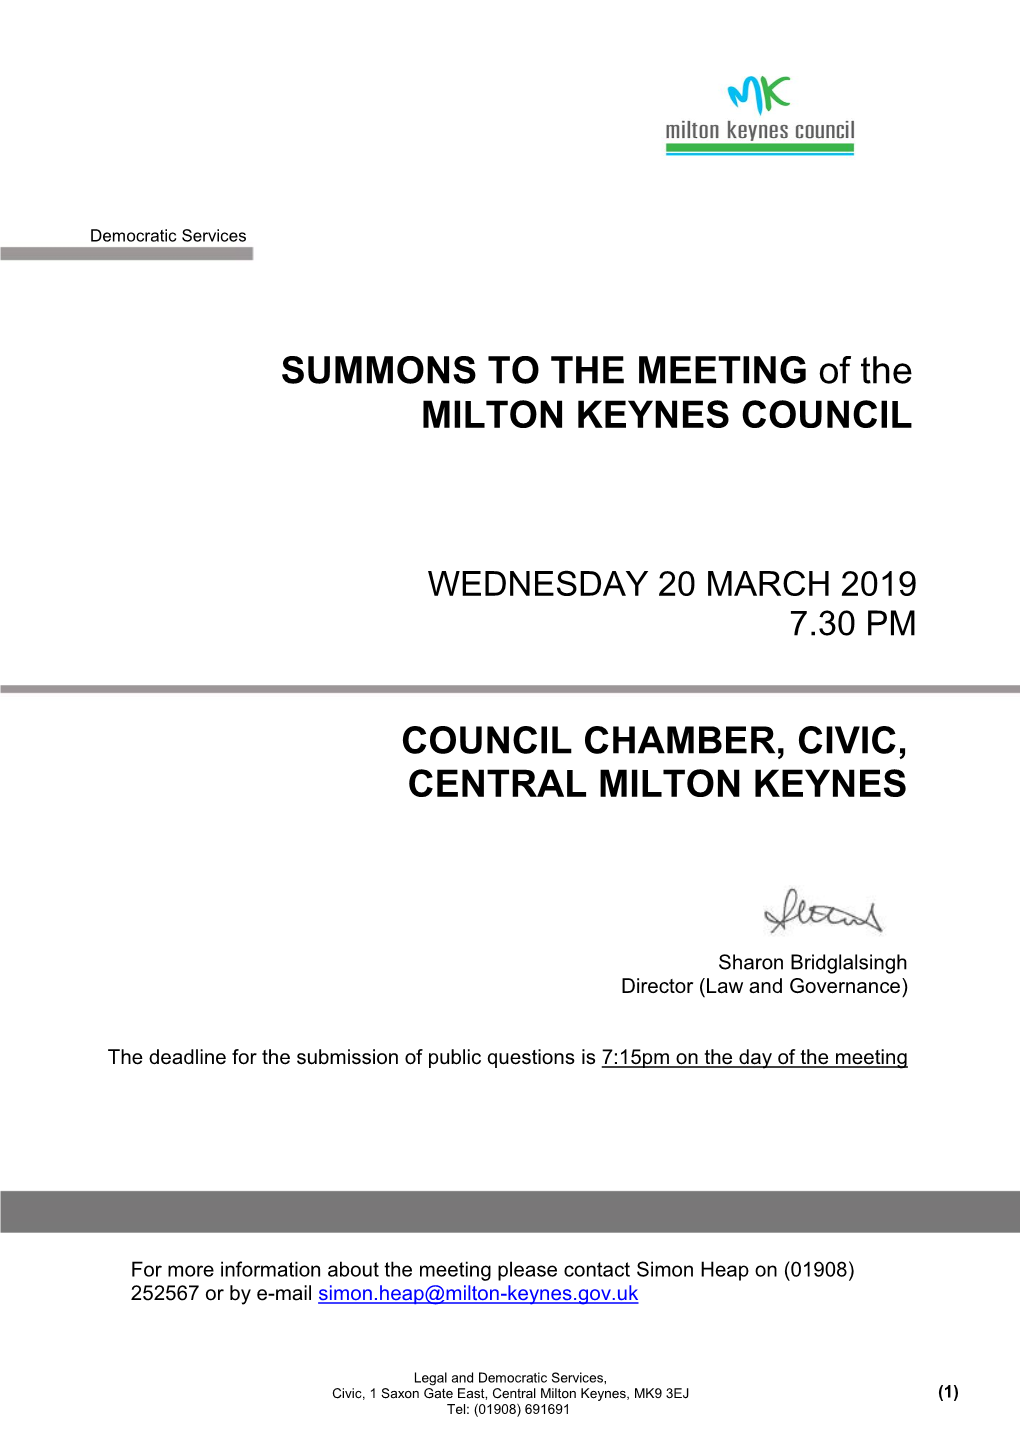 SUMMONS to the MEETING of the MILTON KEYNES COUNCIL